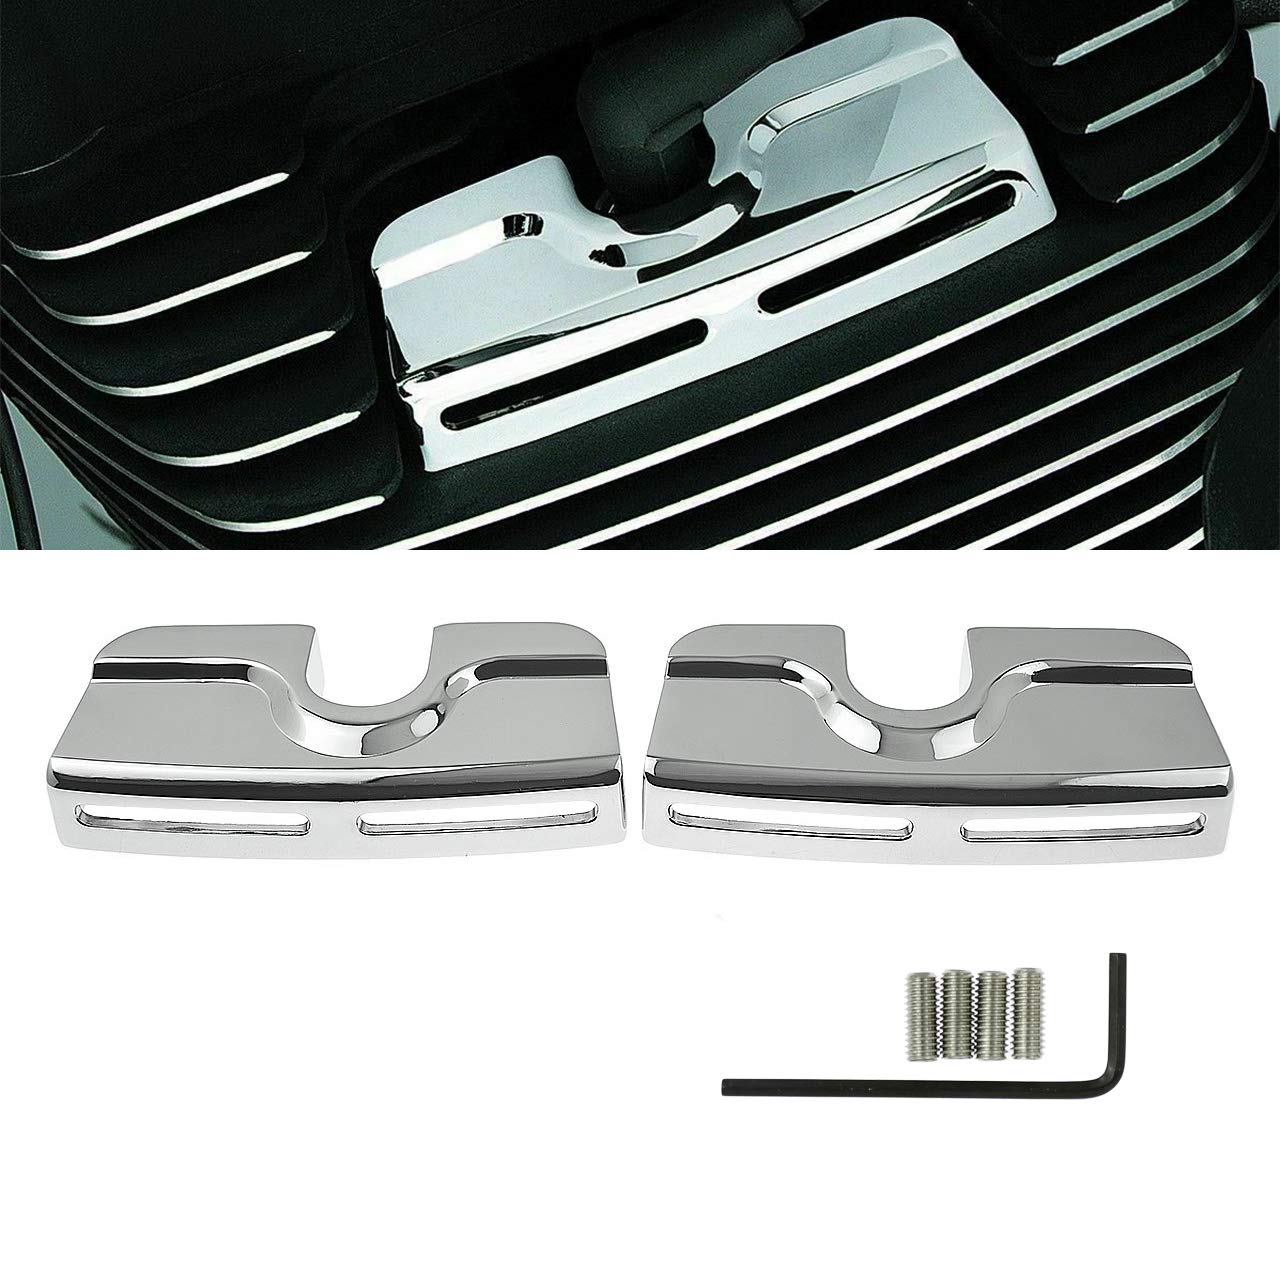 HDBUBALUS Left&Right Chrome Spark Plug Head Bolt Covers Fit for Harley Dyna Softail Touring Twin Cam 1999-2017 von HDBUBALUS